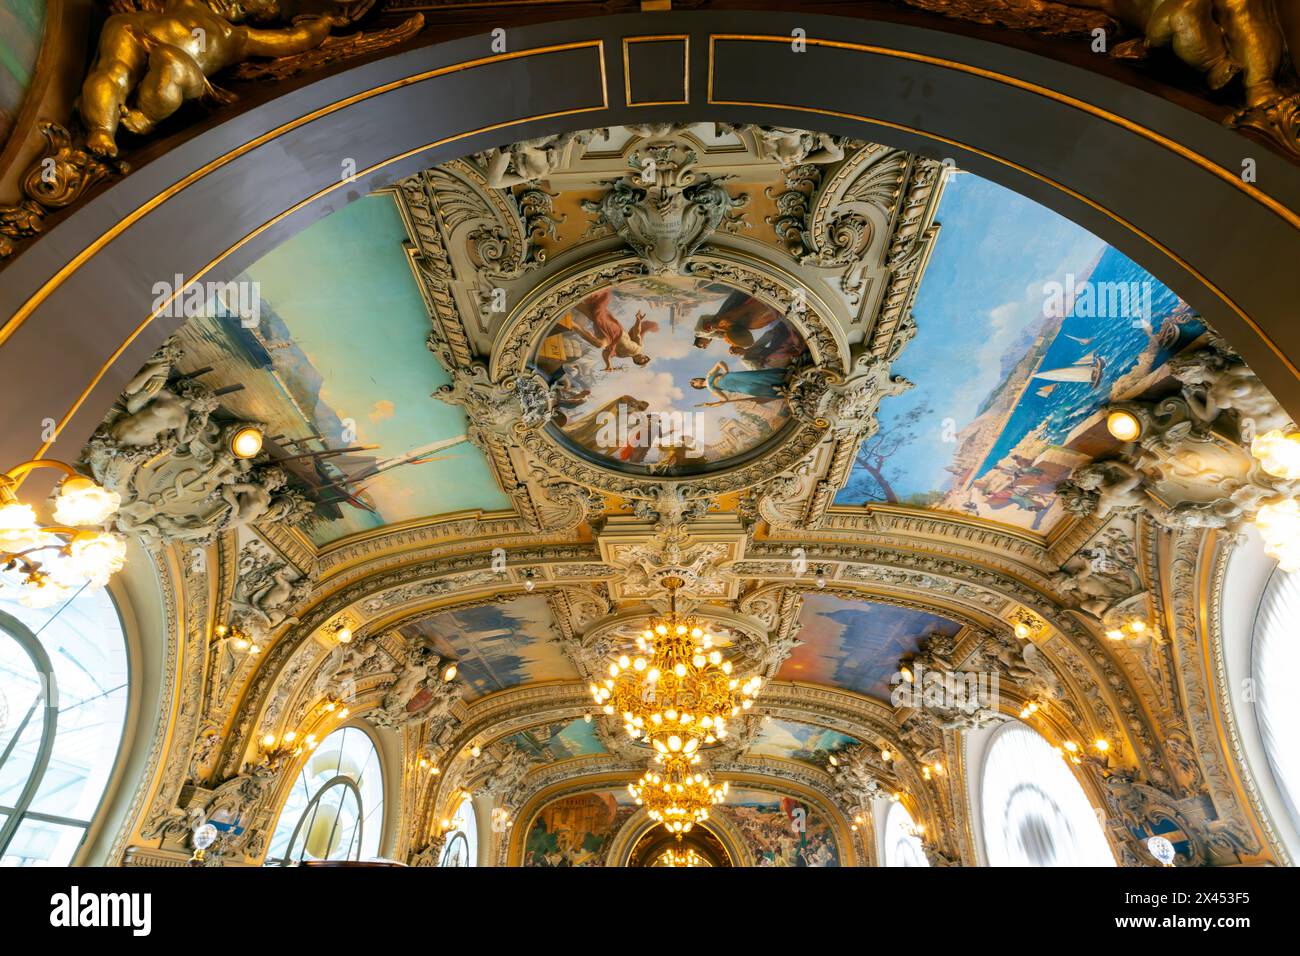 Dining Room at Le Train Bleu, Gare de Lyon, Paris, France. Striking are the 41 sumptuous wall and ceiling paintings, which depict scenes from France. Stock Photo